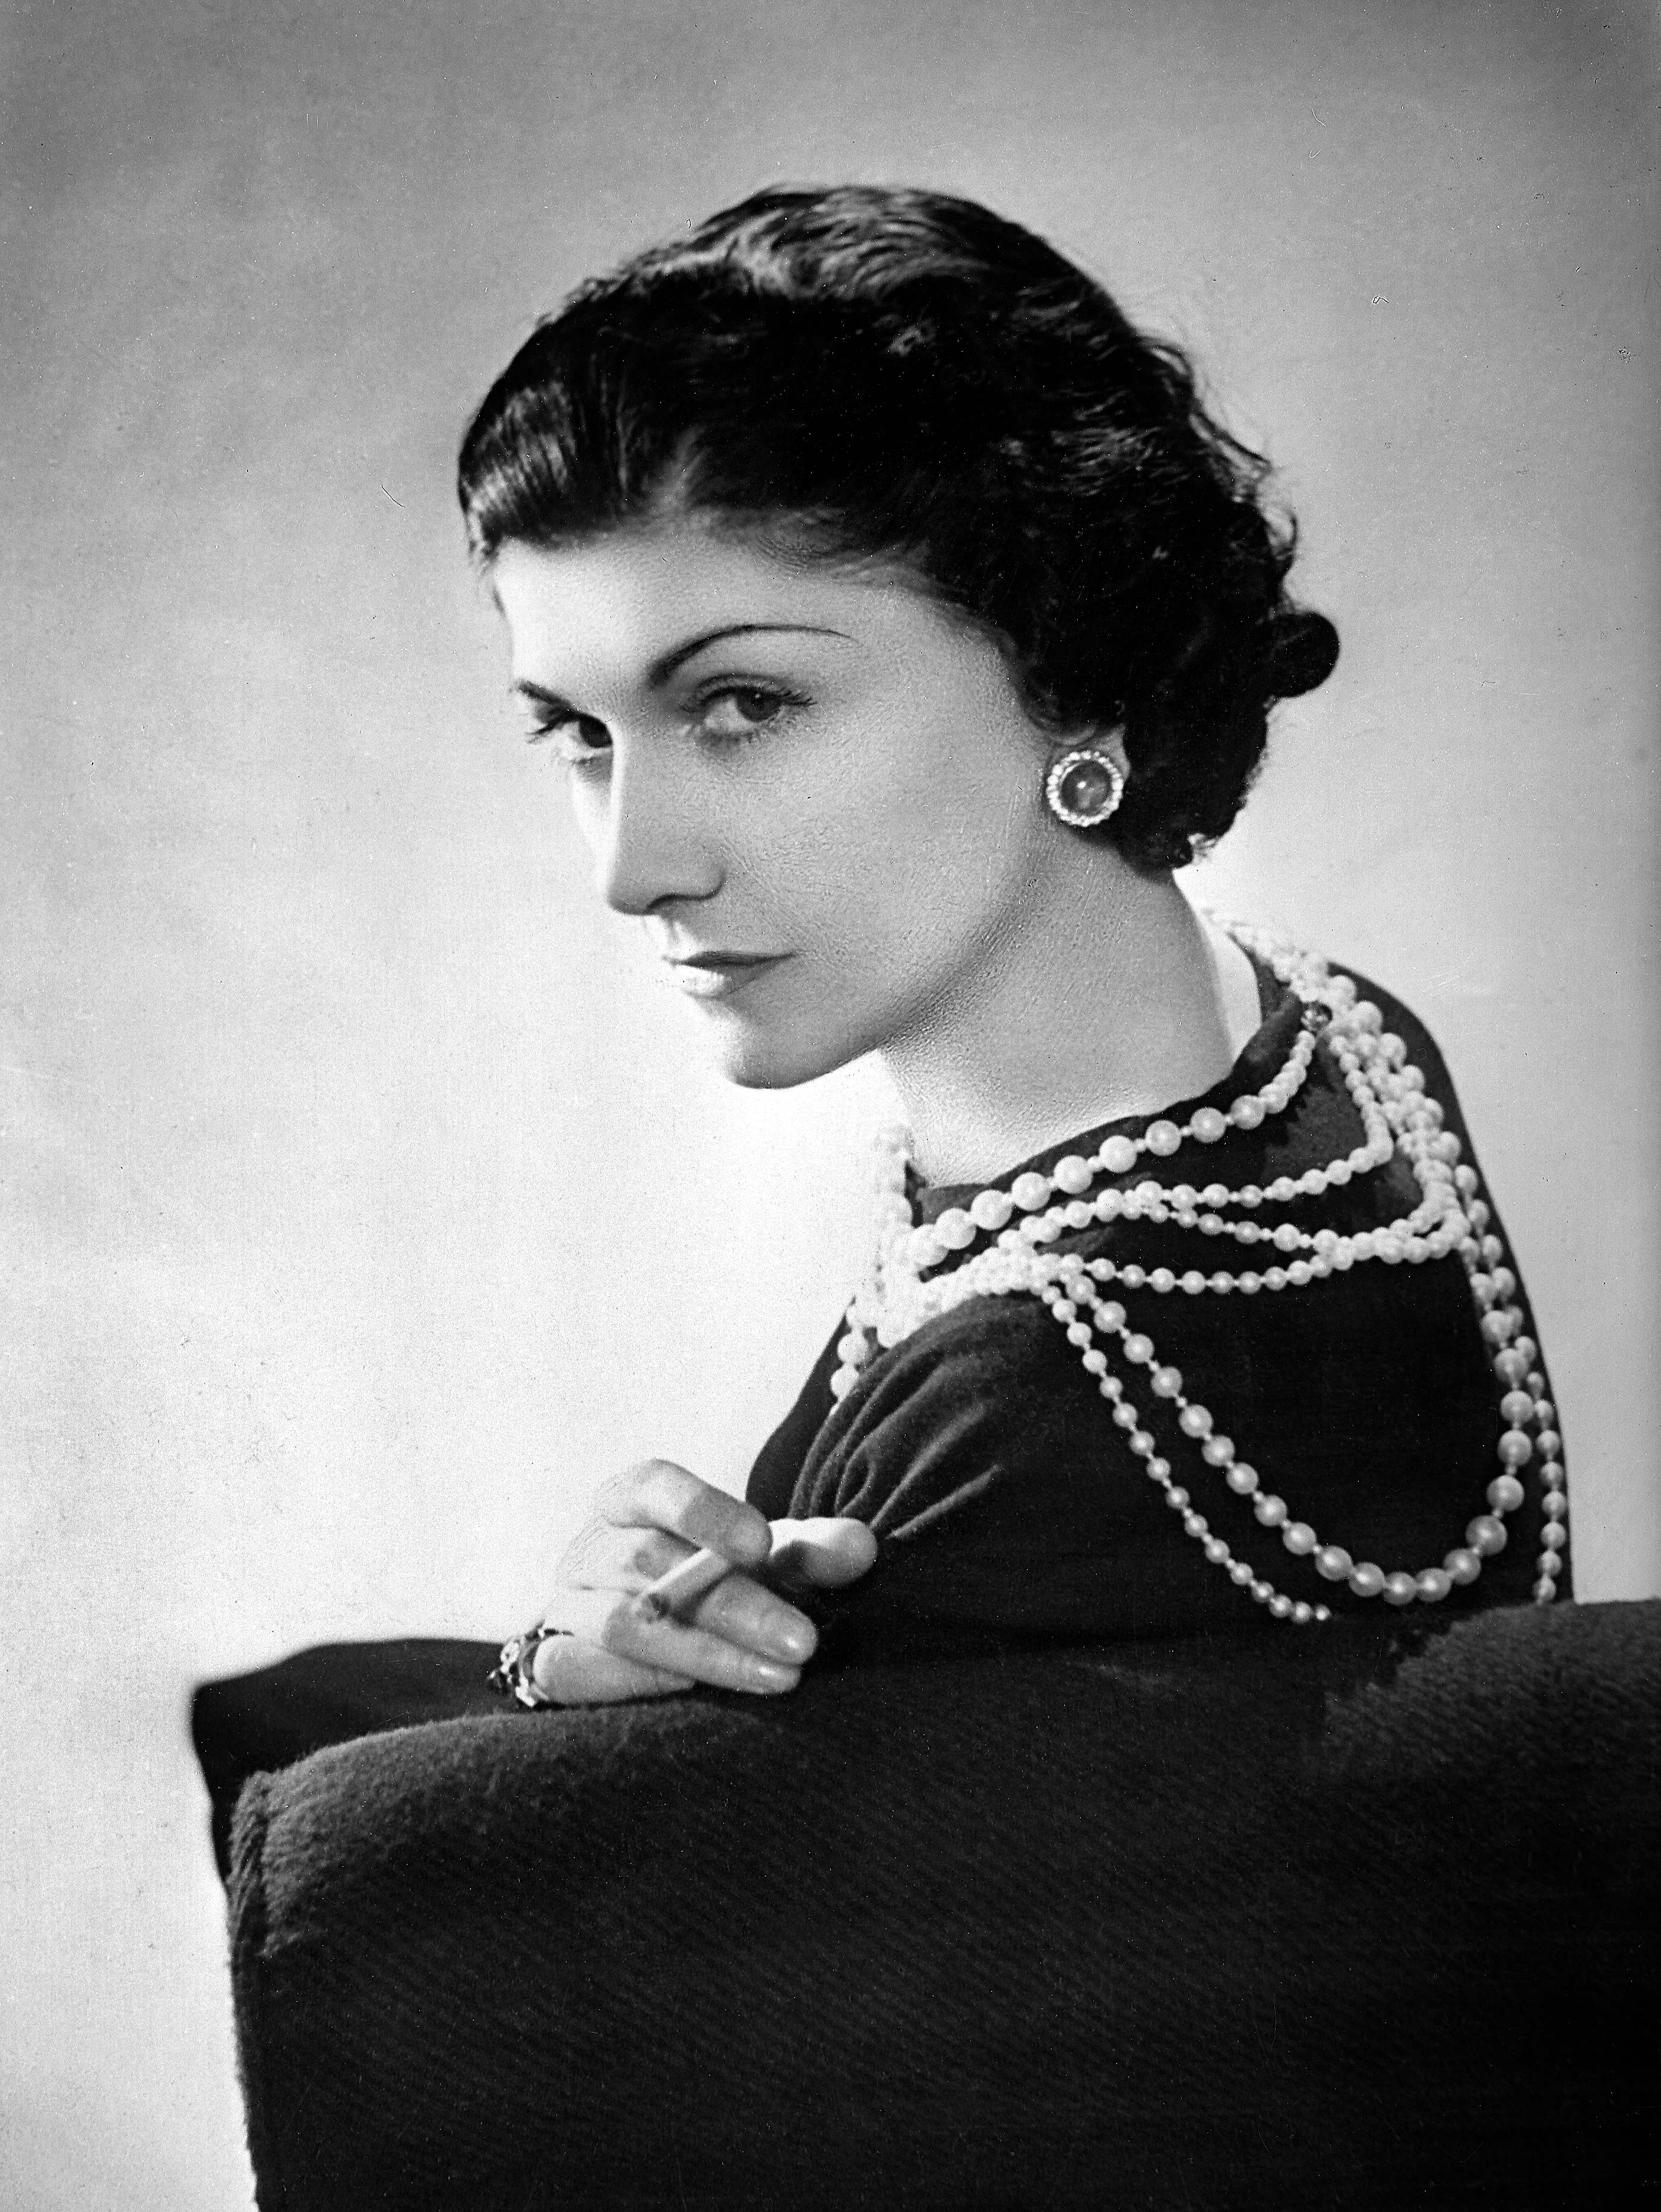 Talk About Iconic: How to Channel Your Inner Coco Chanel